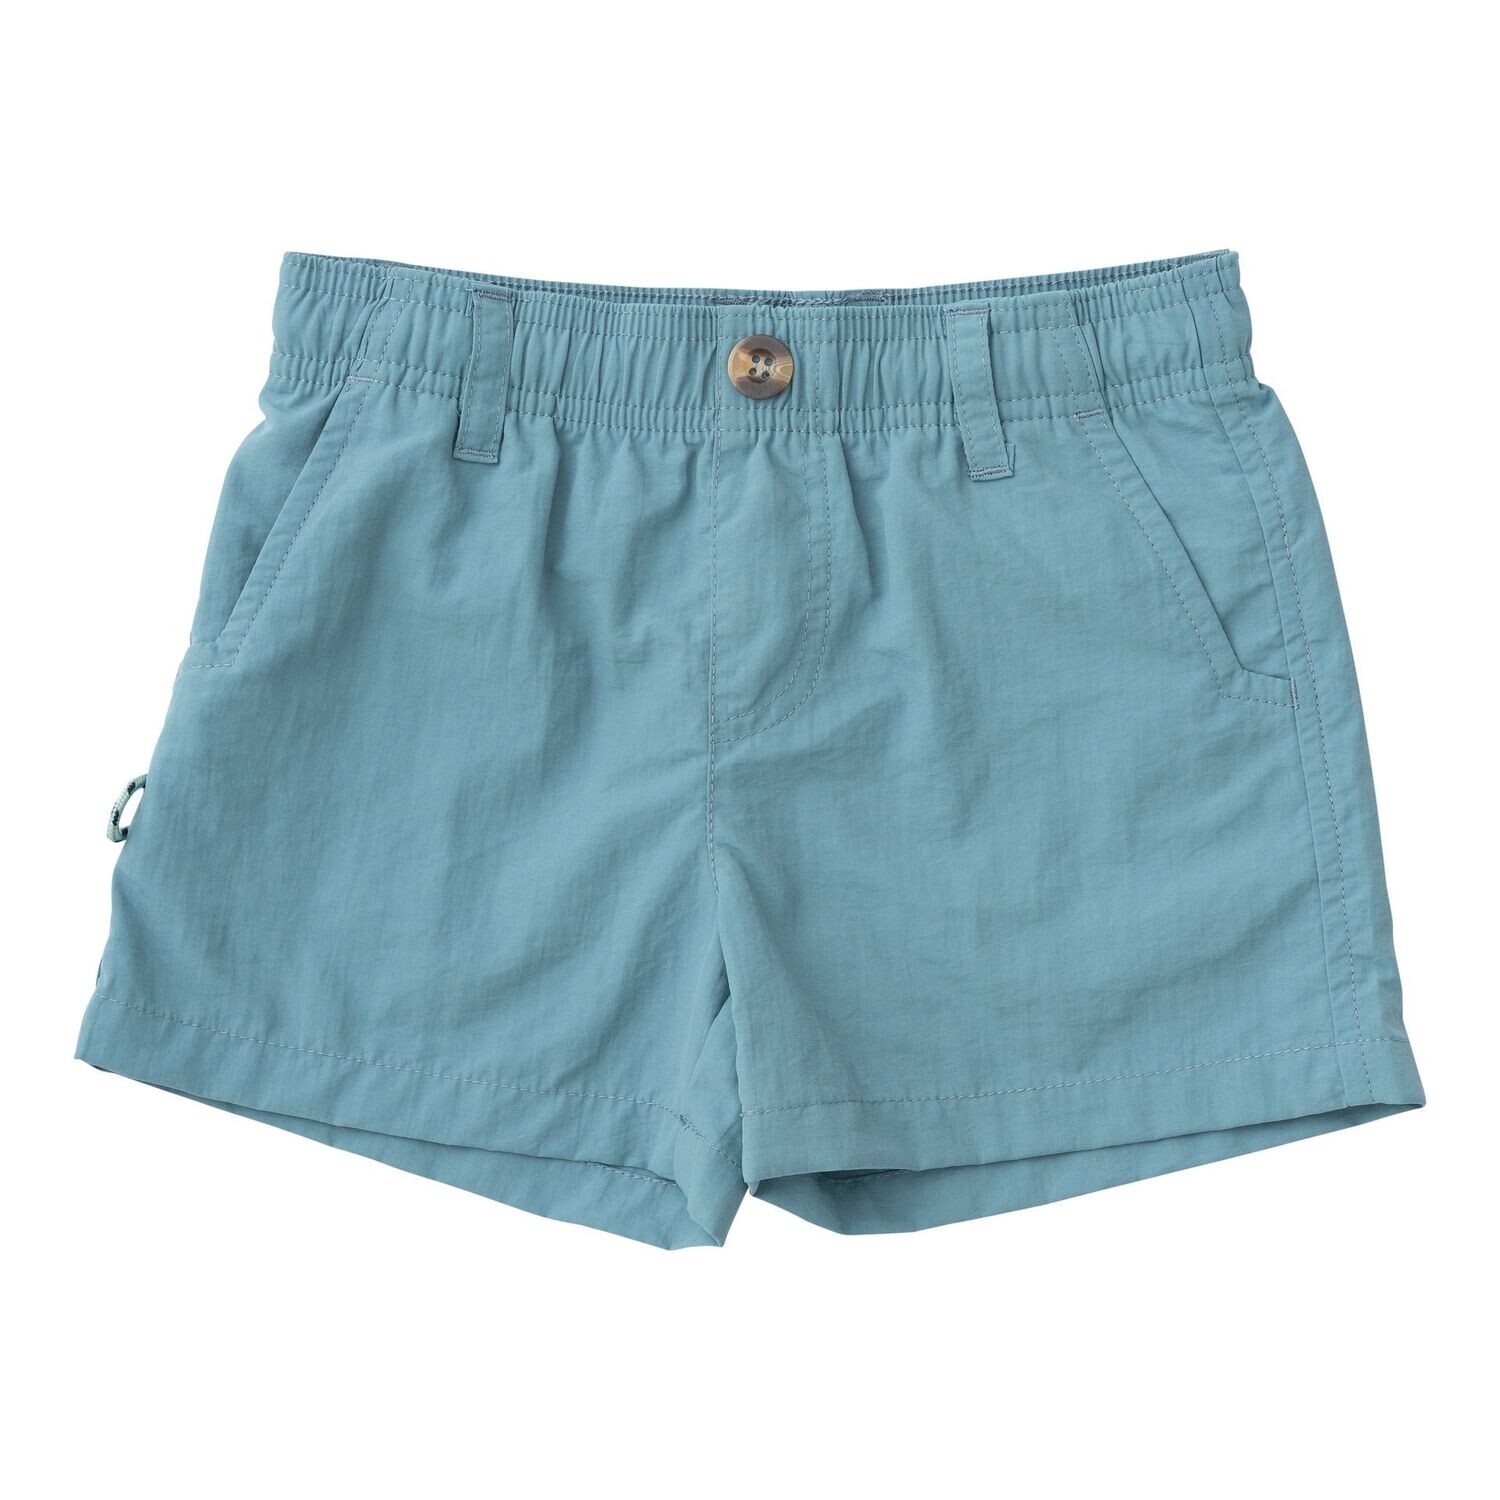 Outrigger Performance Short-Smoke Blue, Size: 2T